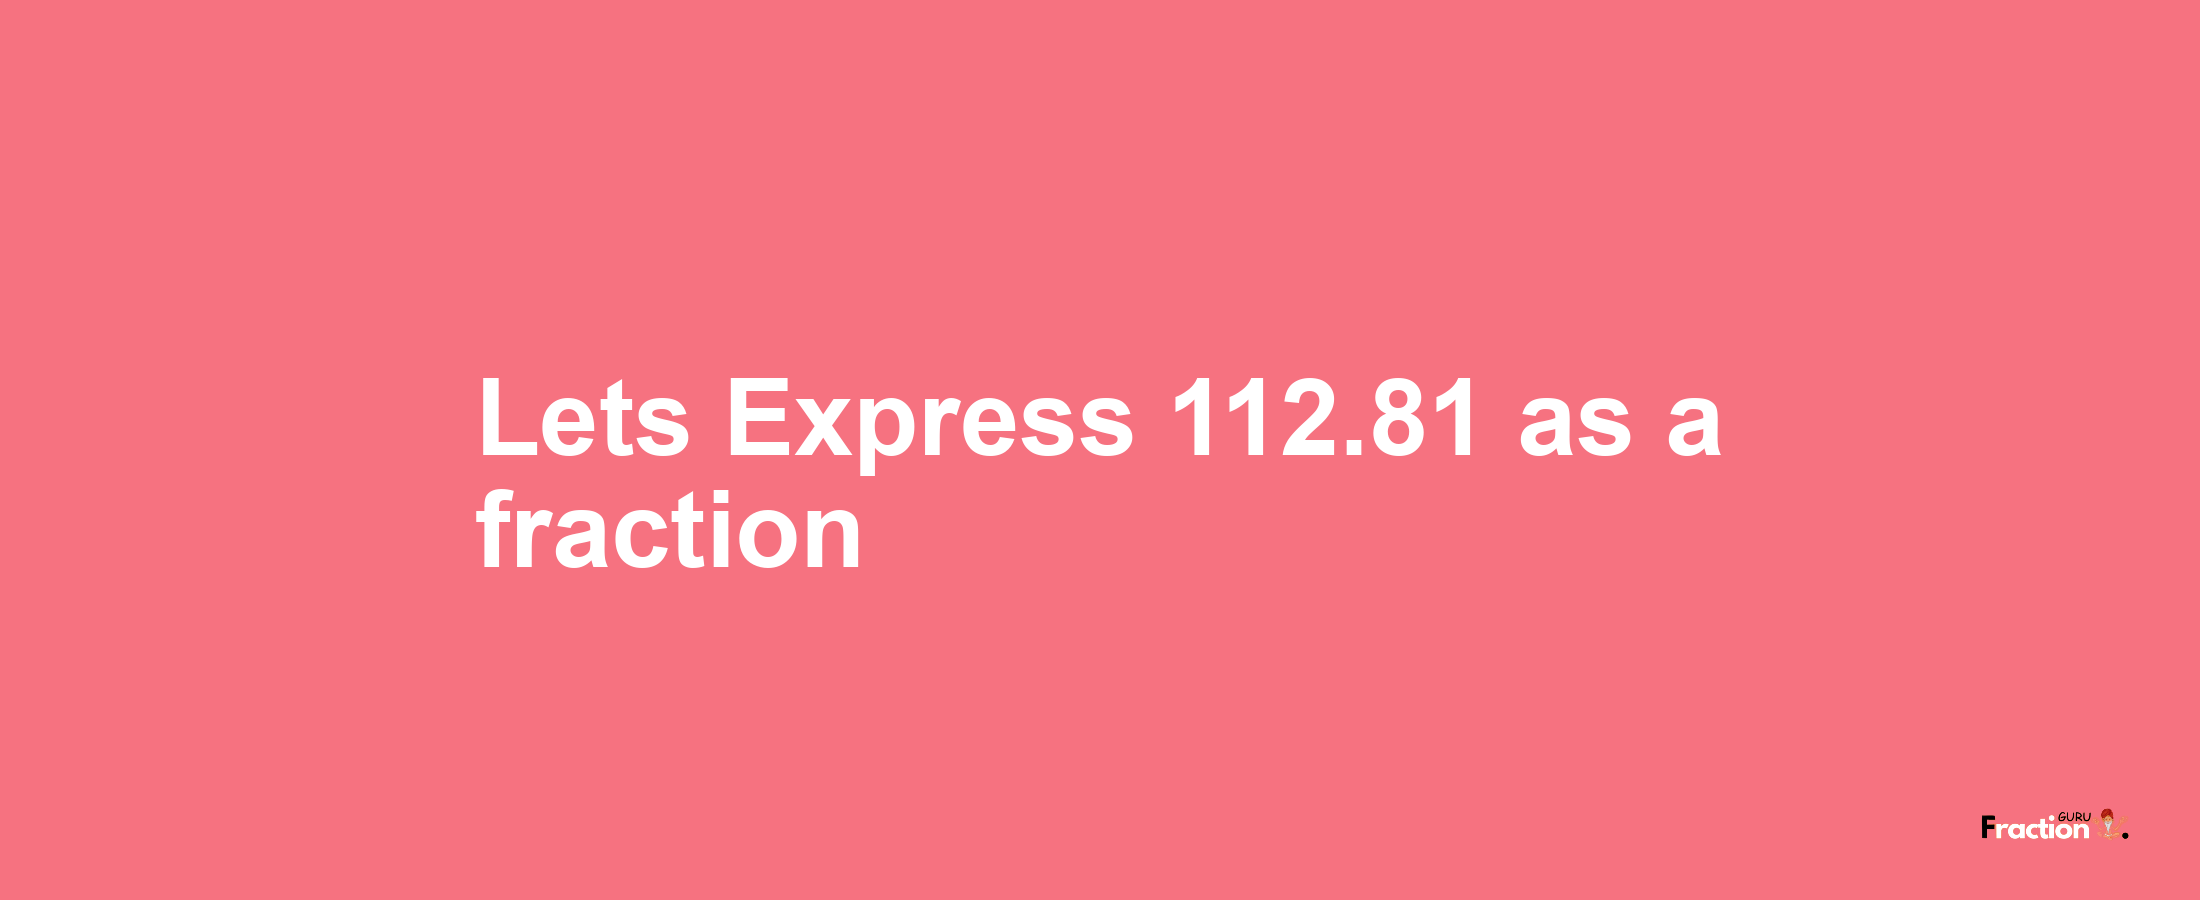 Lets Express 112.81 as afraction